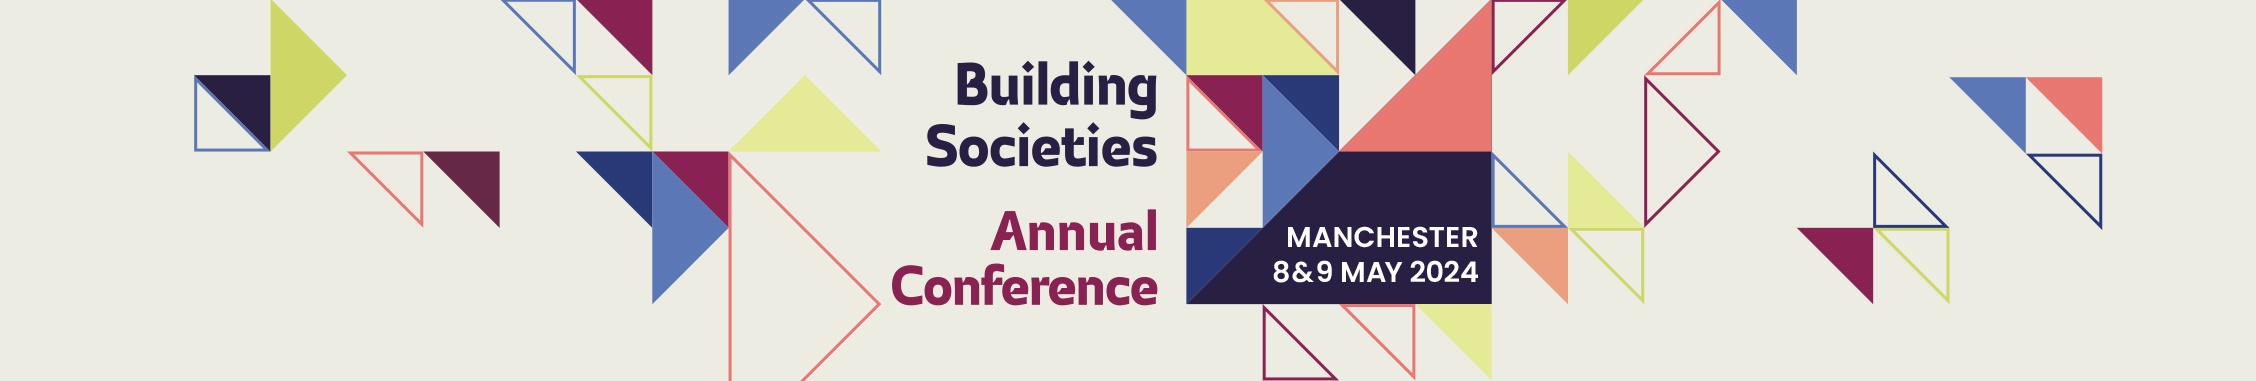 Building Societies Annual Conference 2024